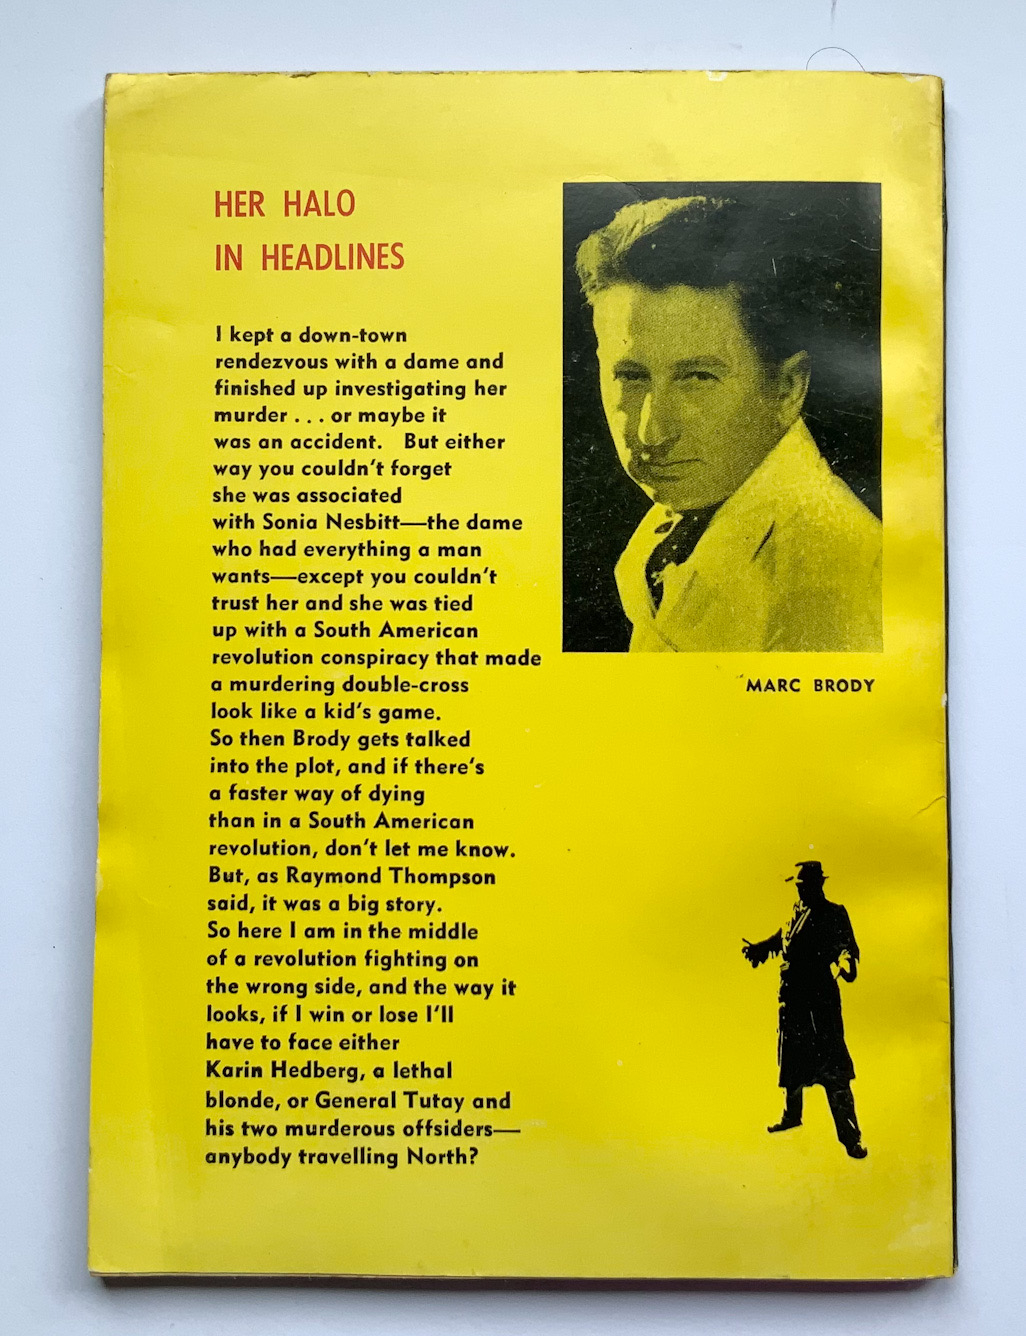 HER HALO IN HEADLINES Australian crime pulp fiction book by Marc Brody 1957